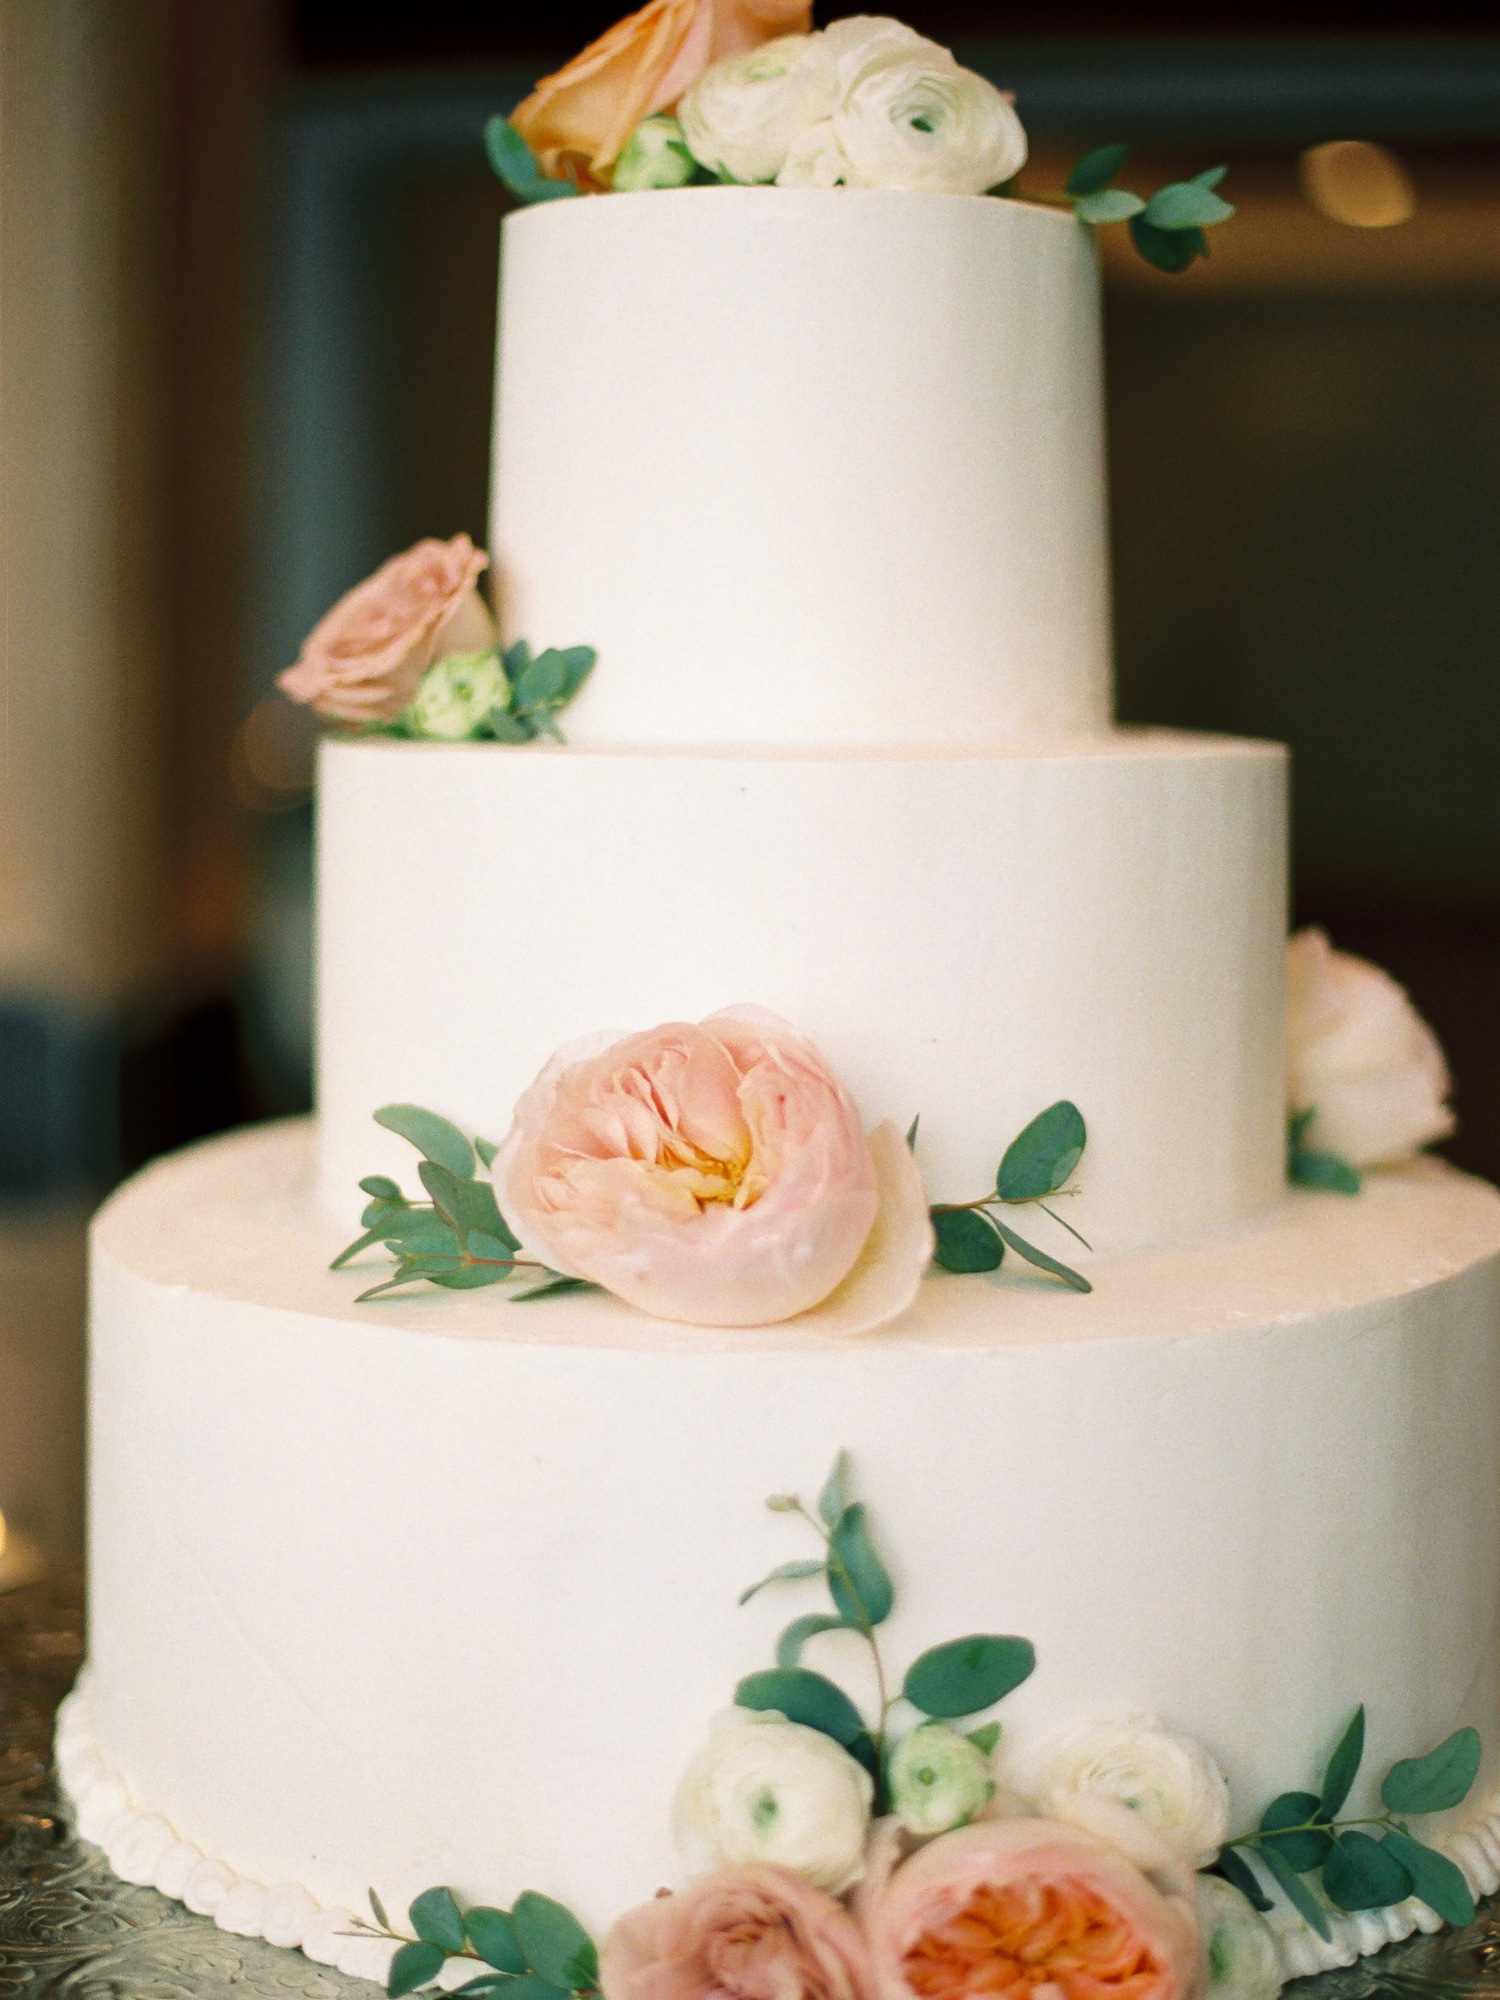 Classic white wedding cake with flowers from The Sonnenalp